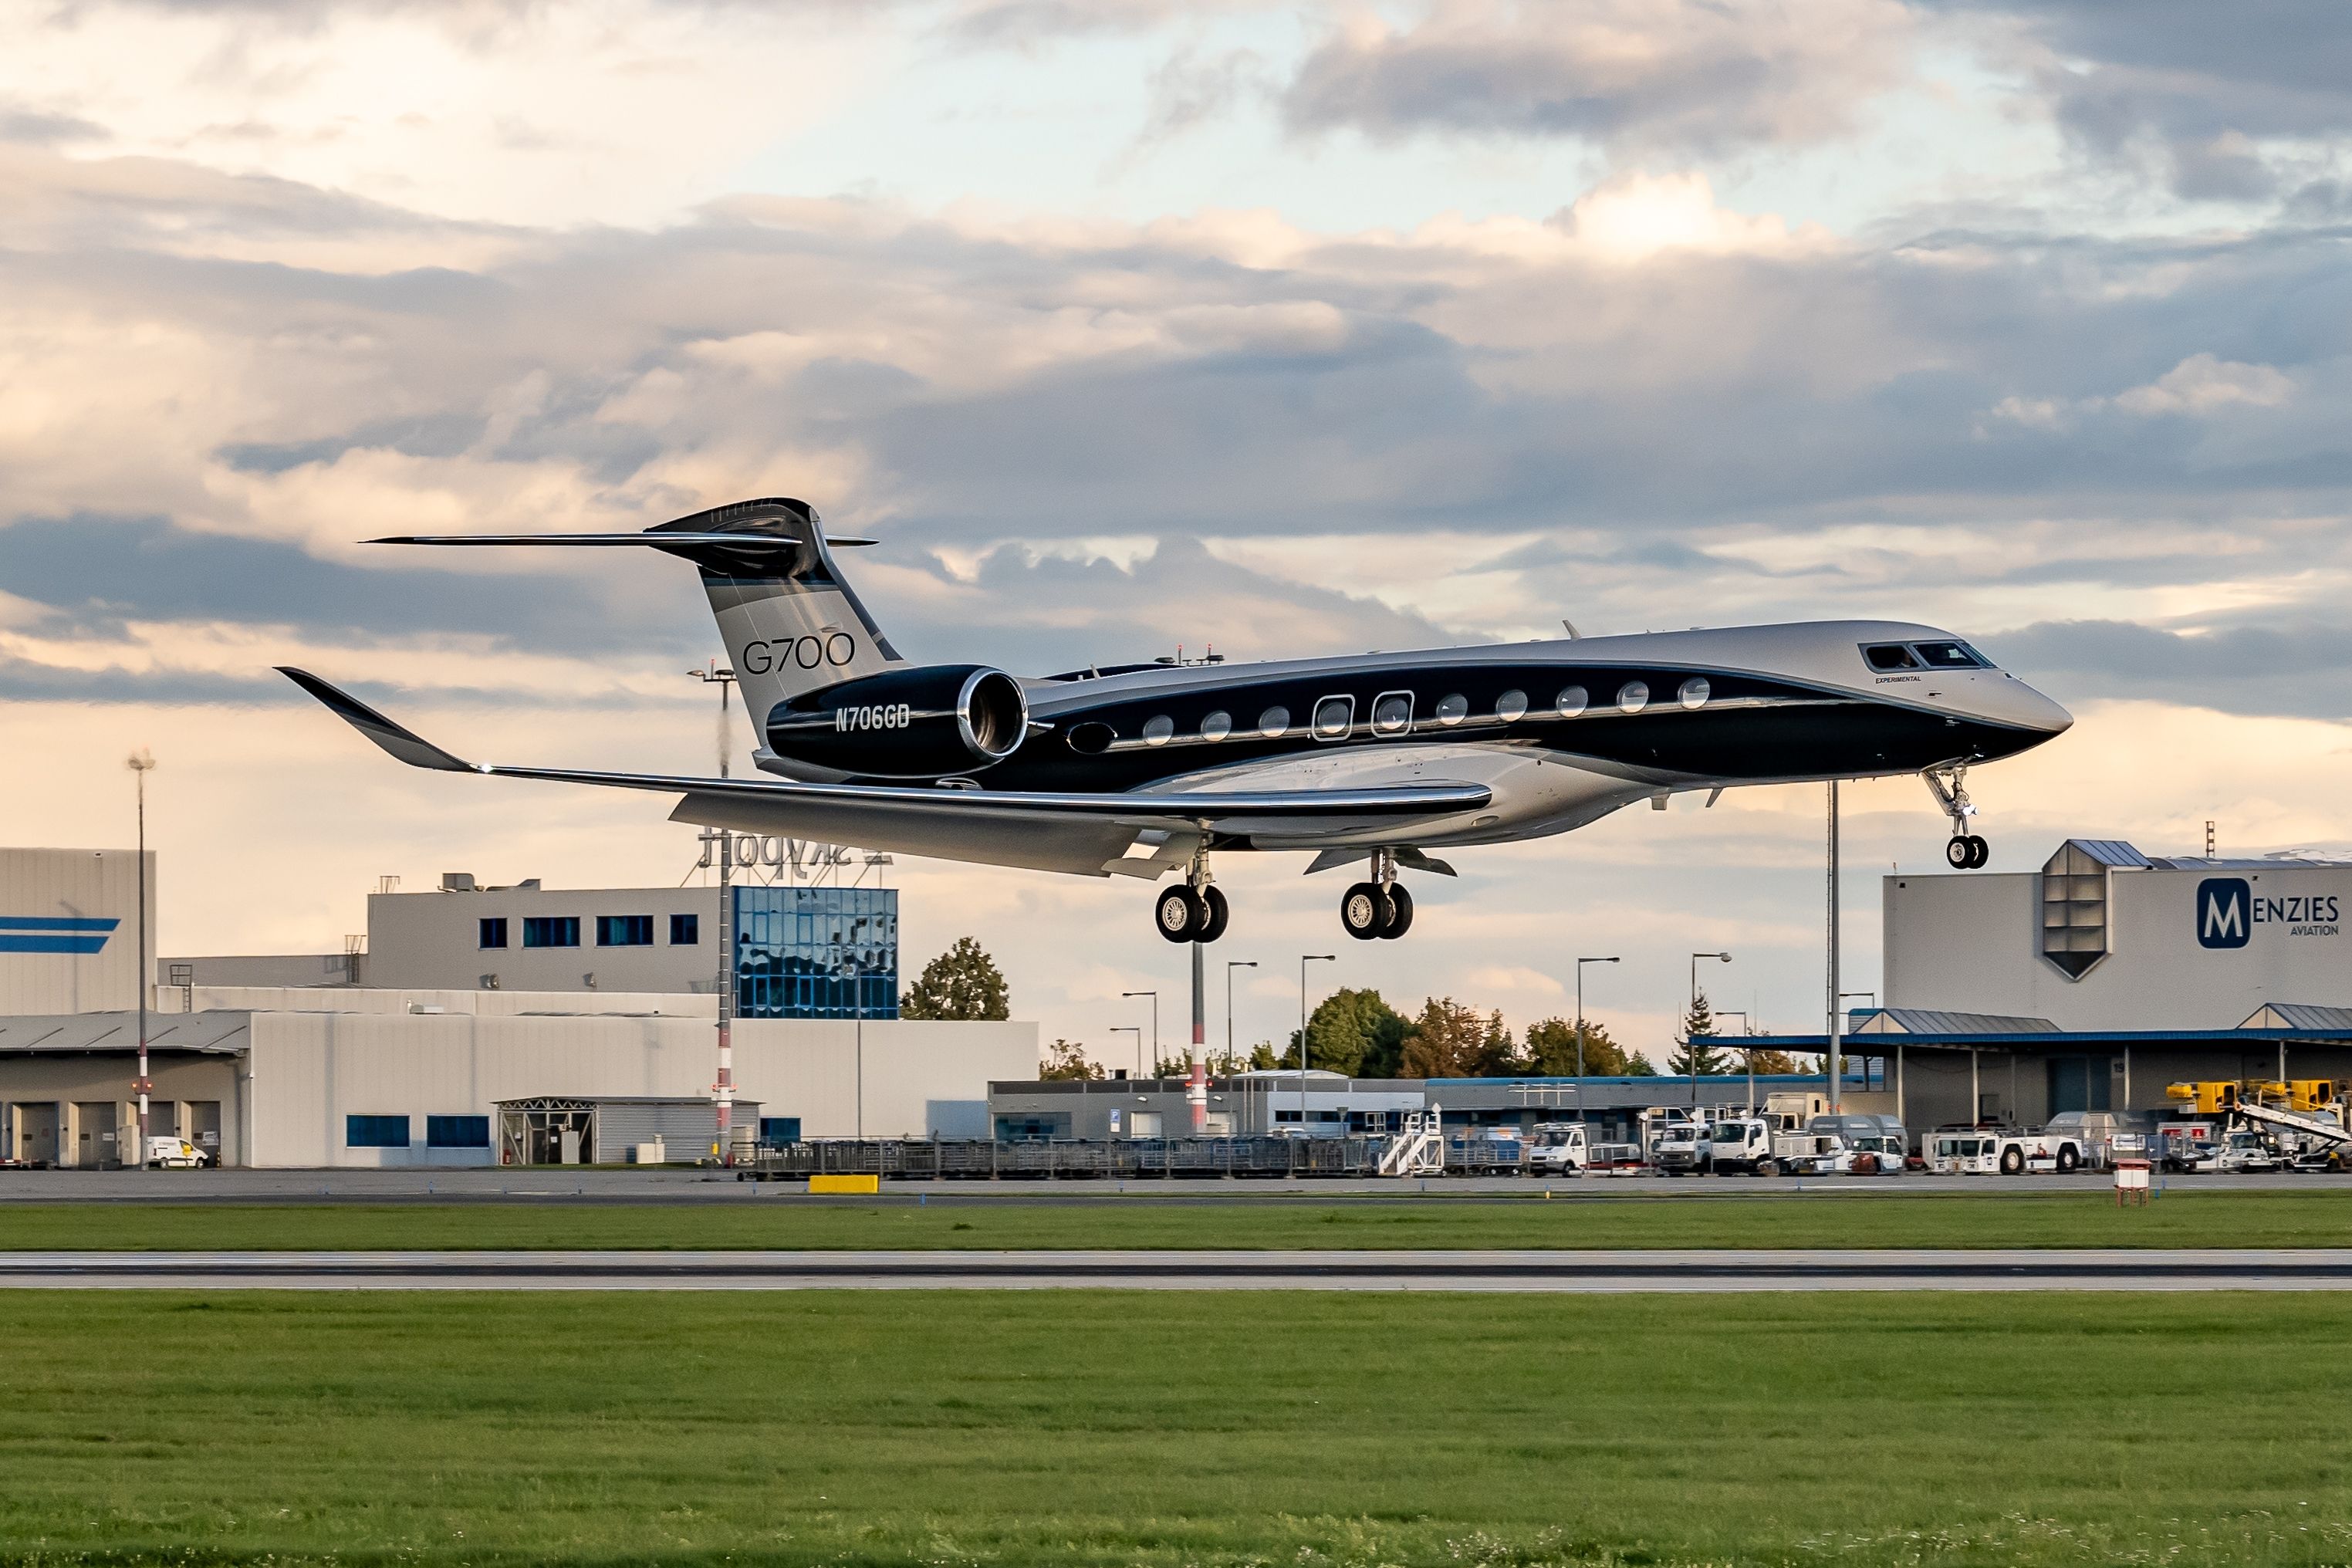 A Gulfstream G700 just after taking off.